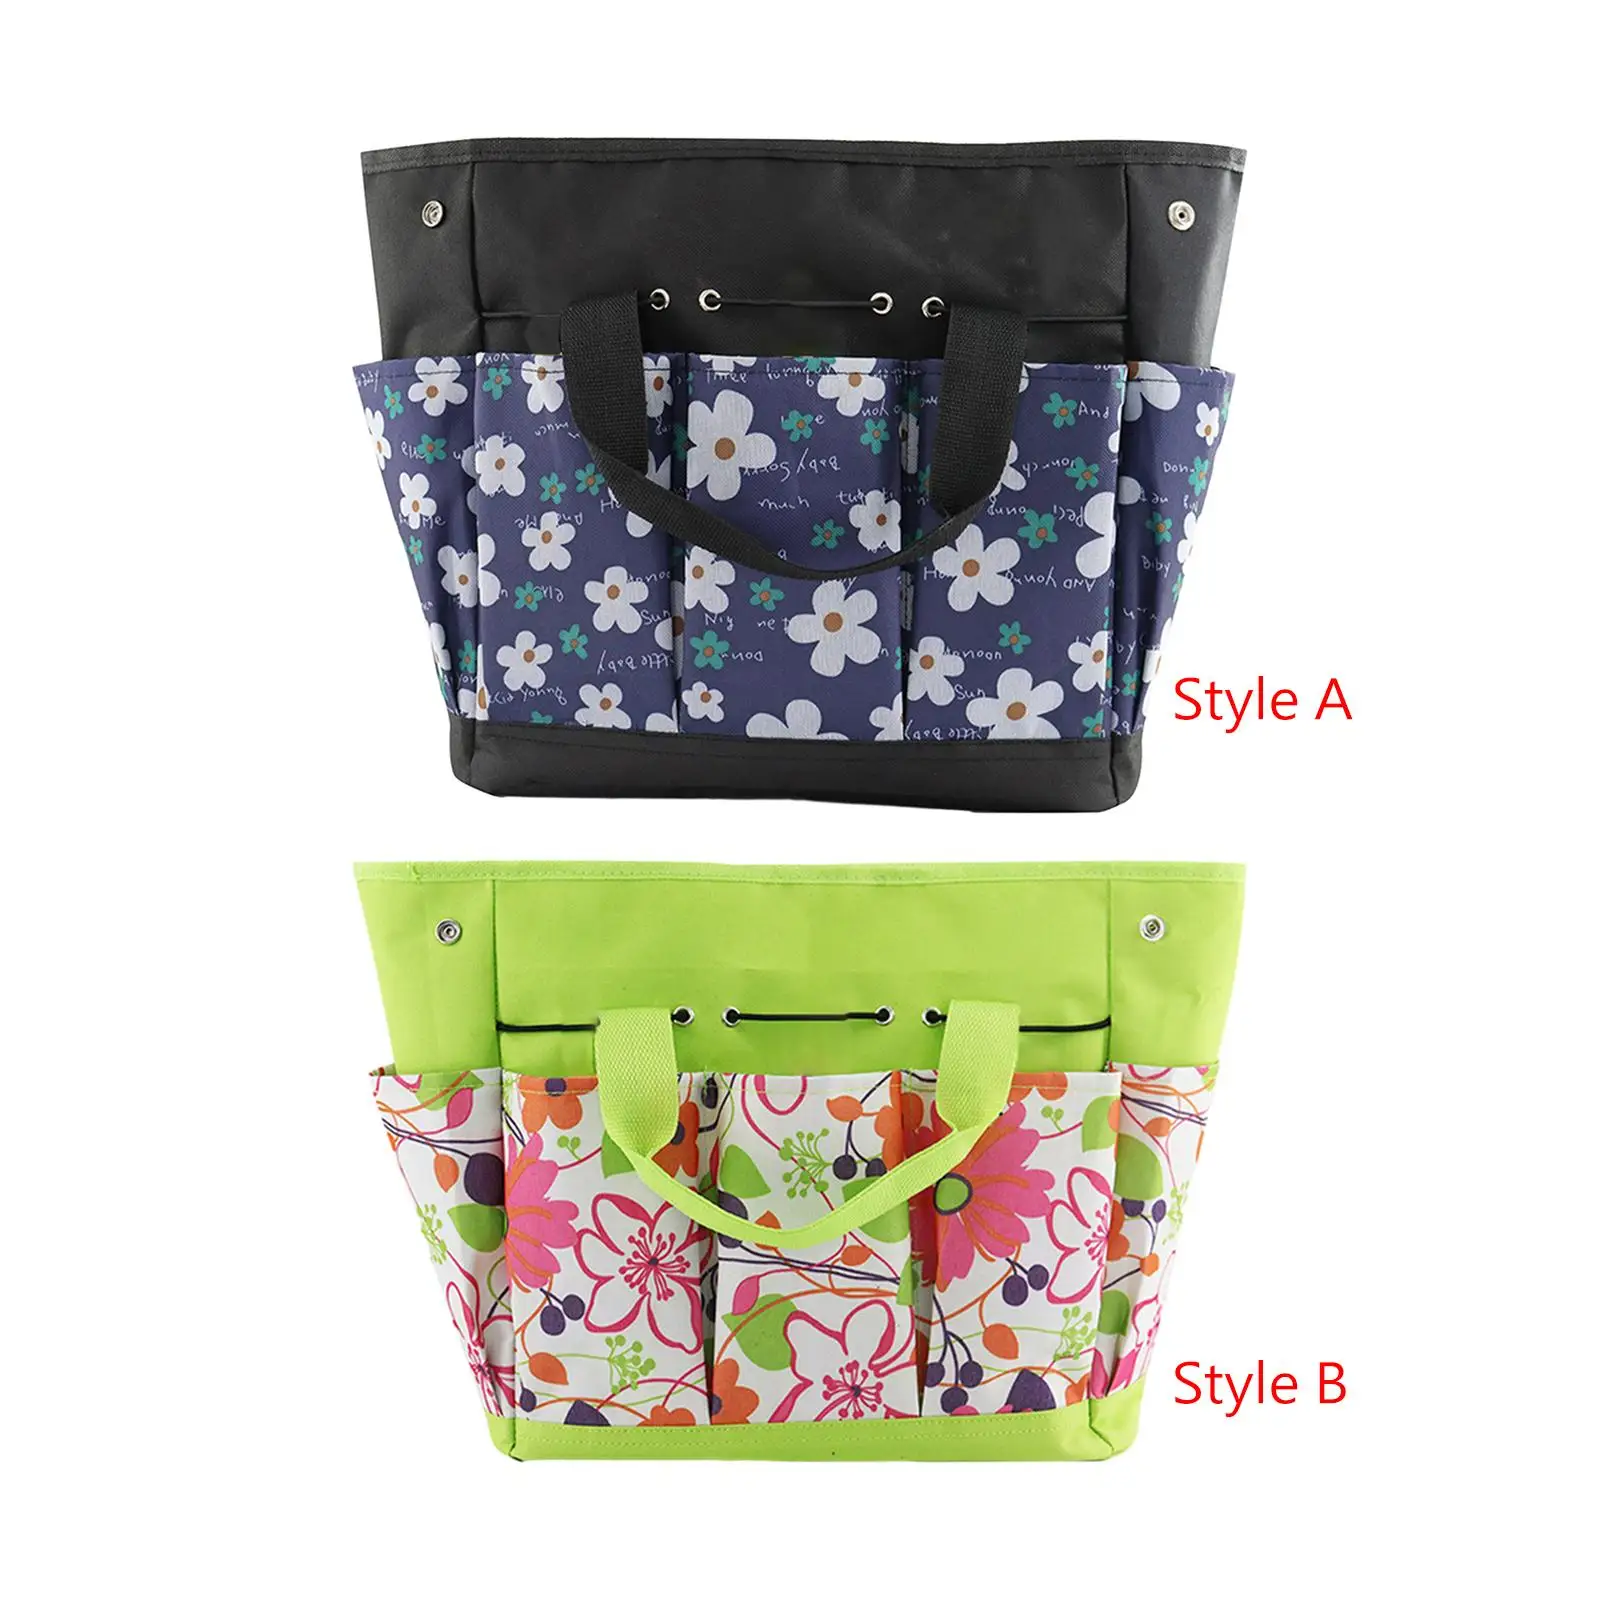 Gardening Hand Tool Storage Tote Bag Reusable Universal Stylish Multipurpose Durable Large Capacity with Handle Multi Pockets